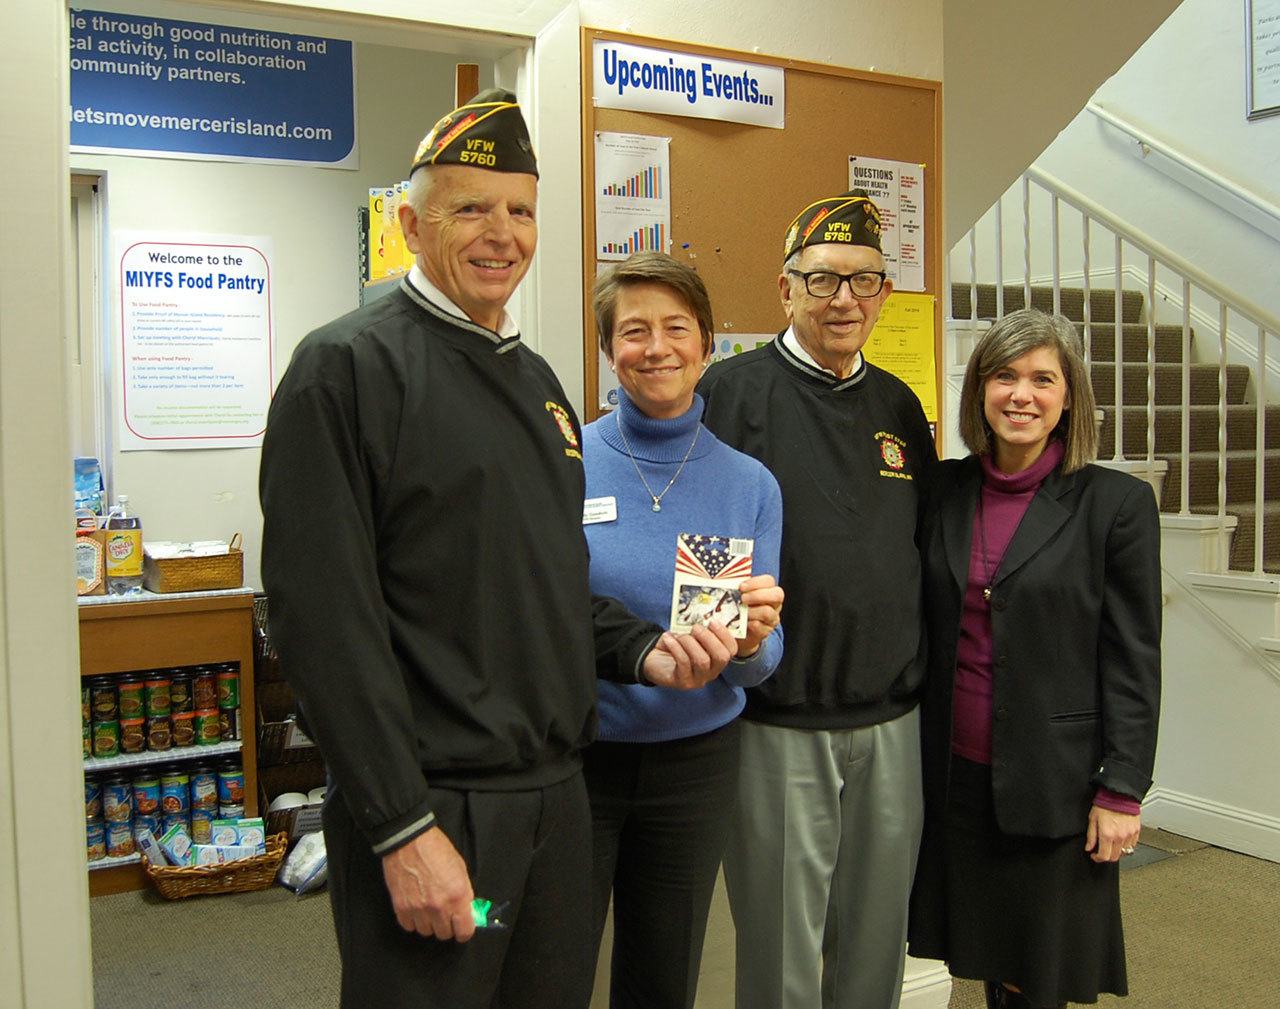 Bob Harper and Dean Quigley of the VFW pose with Cindy Goodwin and Sari Weiss of the city of Mercer Island’s Youth and Family Services (YFS) Department.